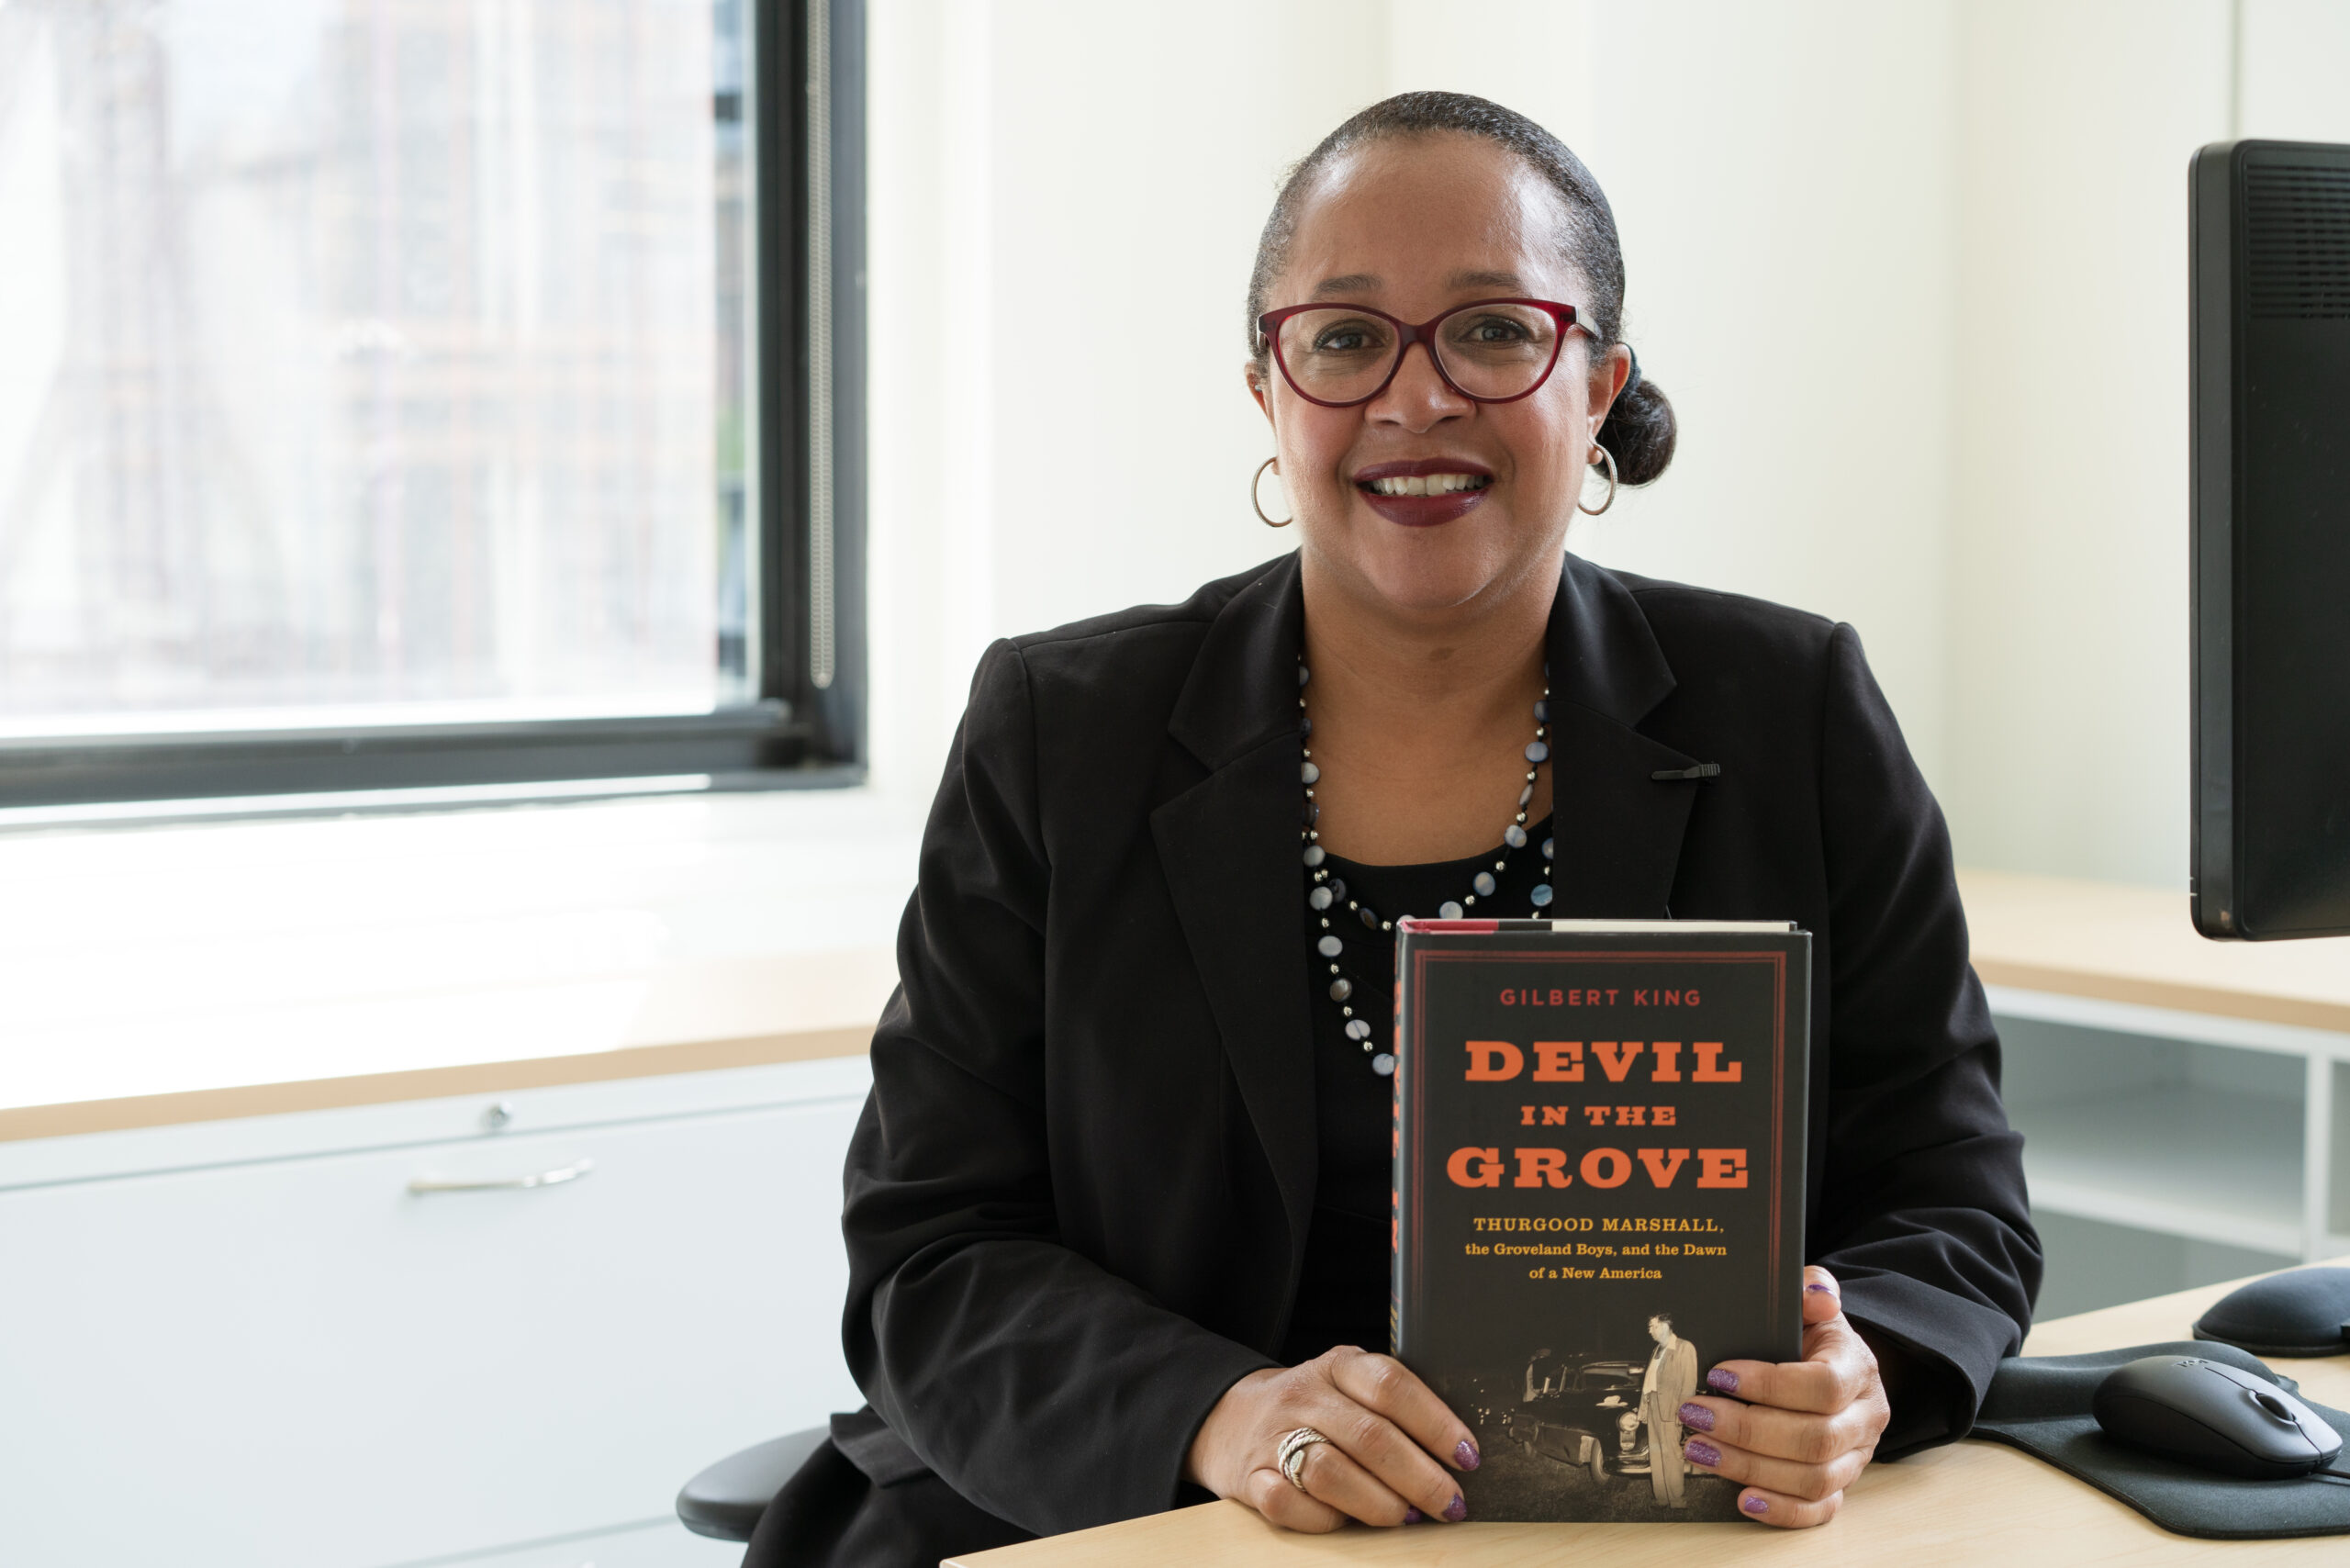 Christina Swarns, Innocence Project's new executive director visiting the office in September 2020. She's holding up one of her favorite books, 